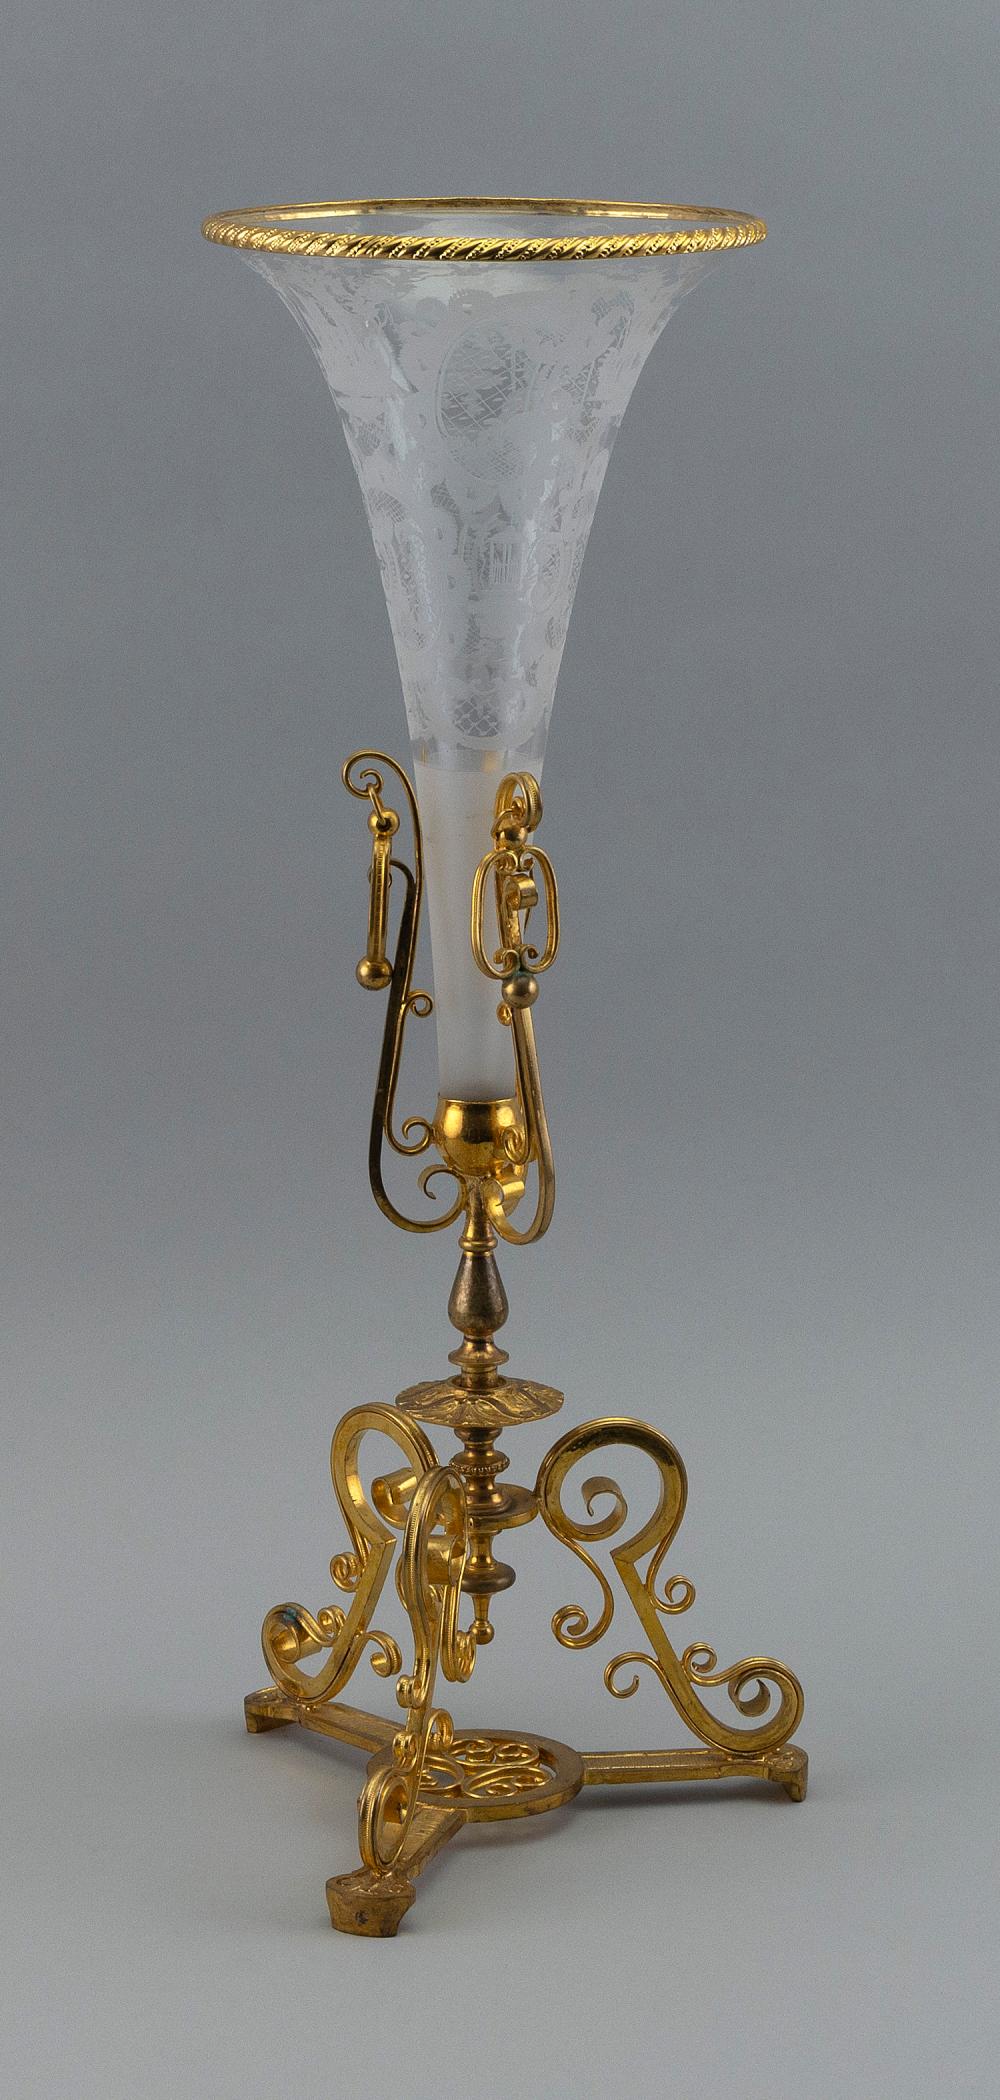 BOHEMIAN GLASS TRUMPET VASE WITH